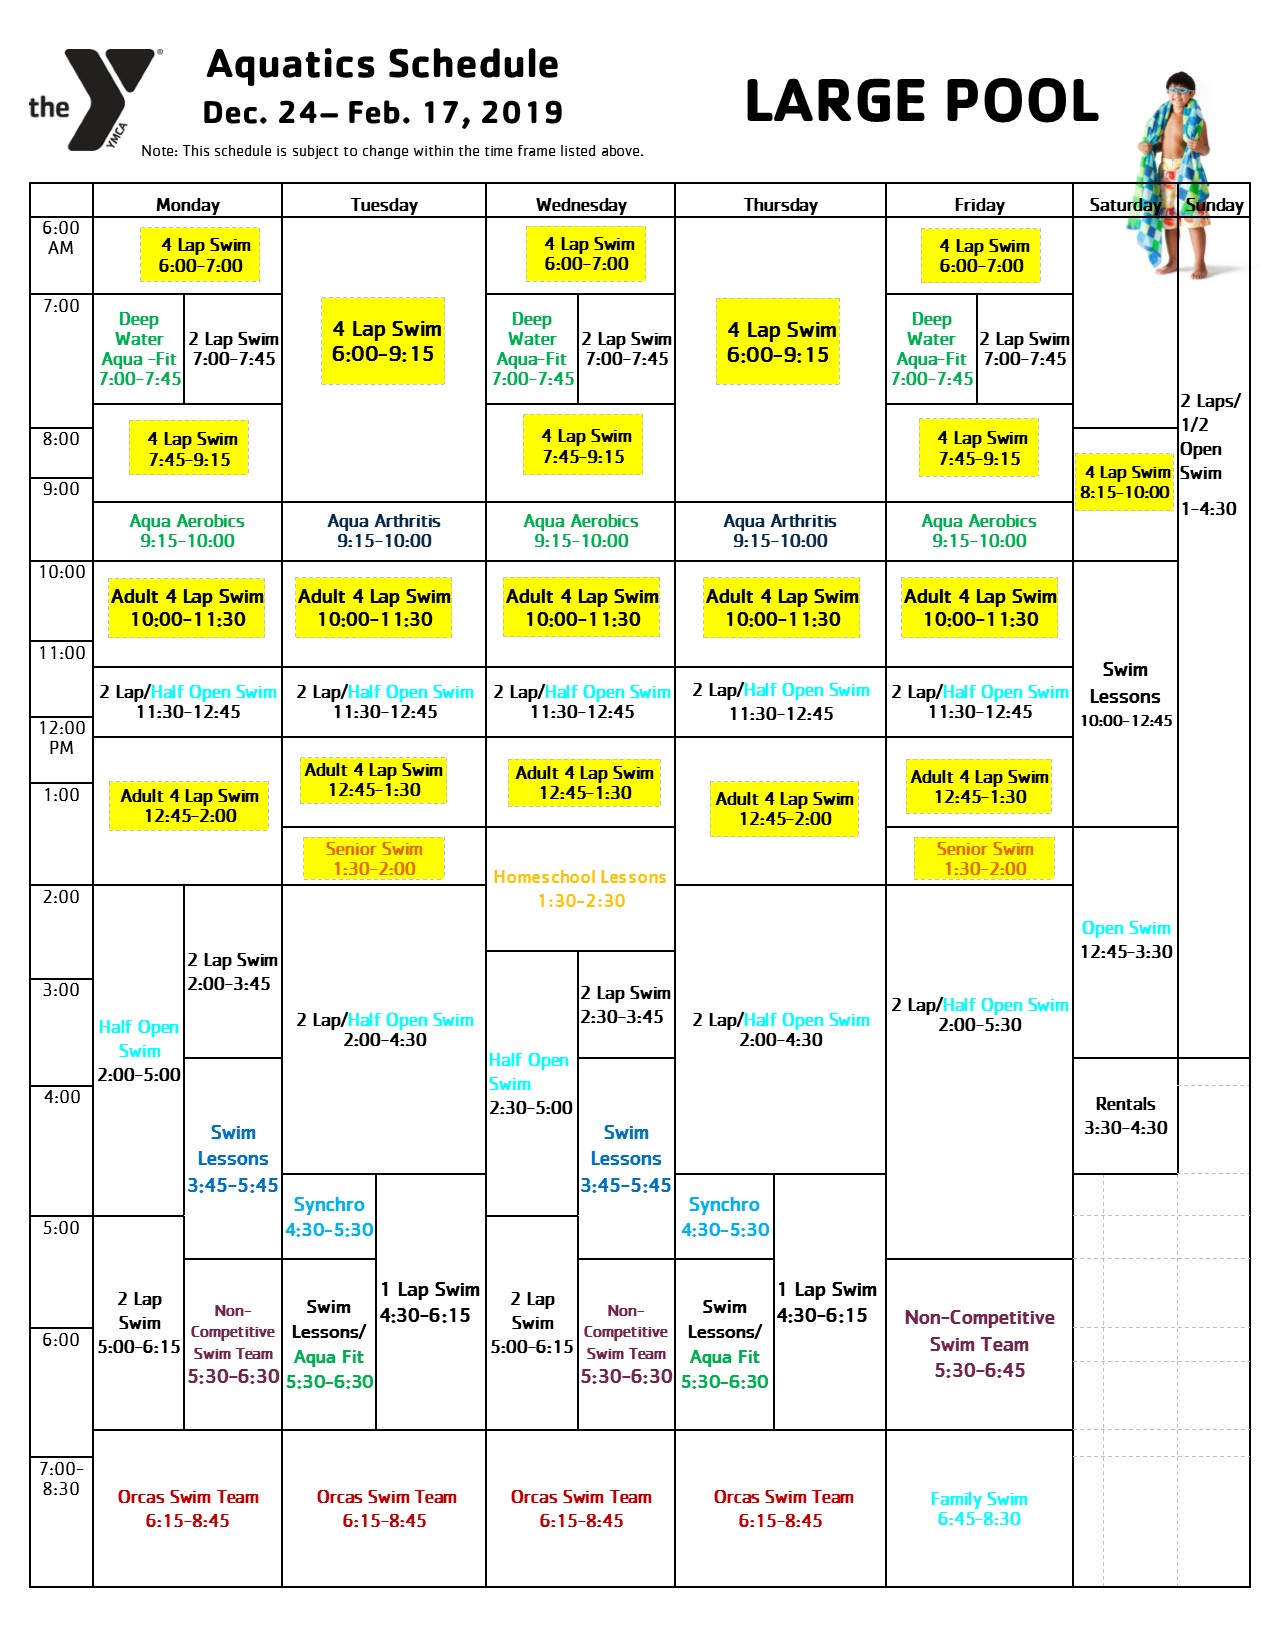 Pool Schedule for the Oneonta Family YMCA